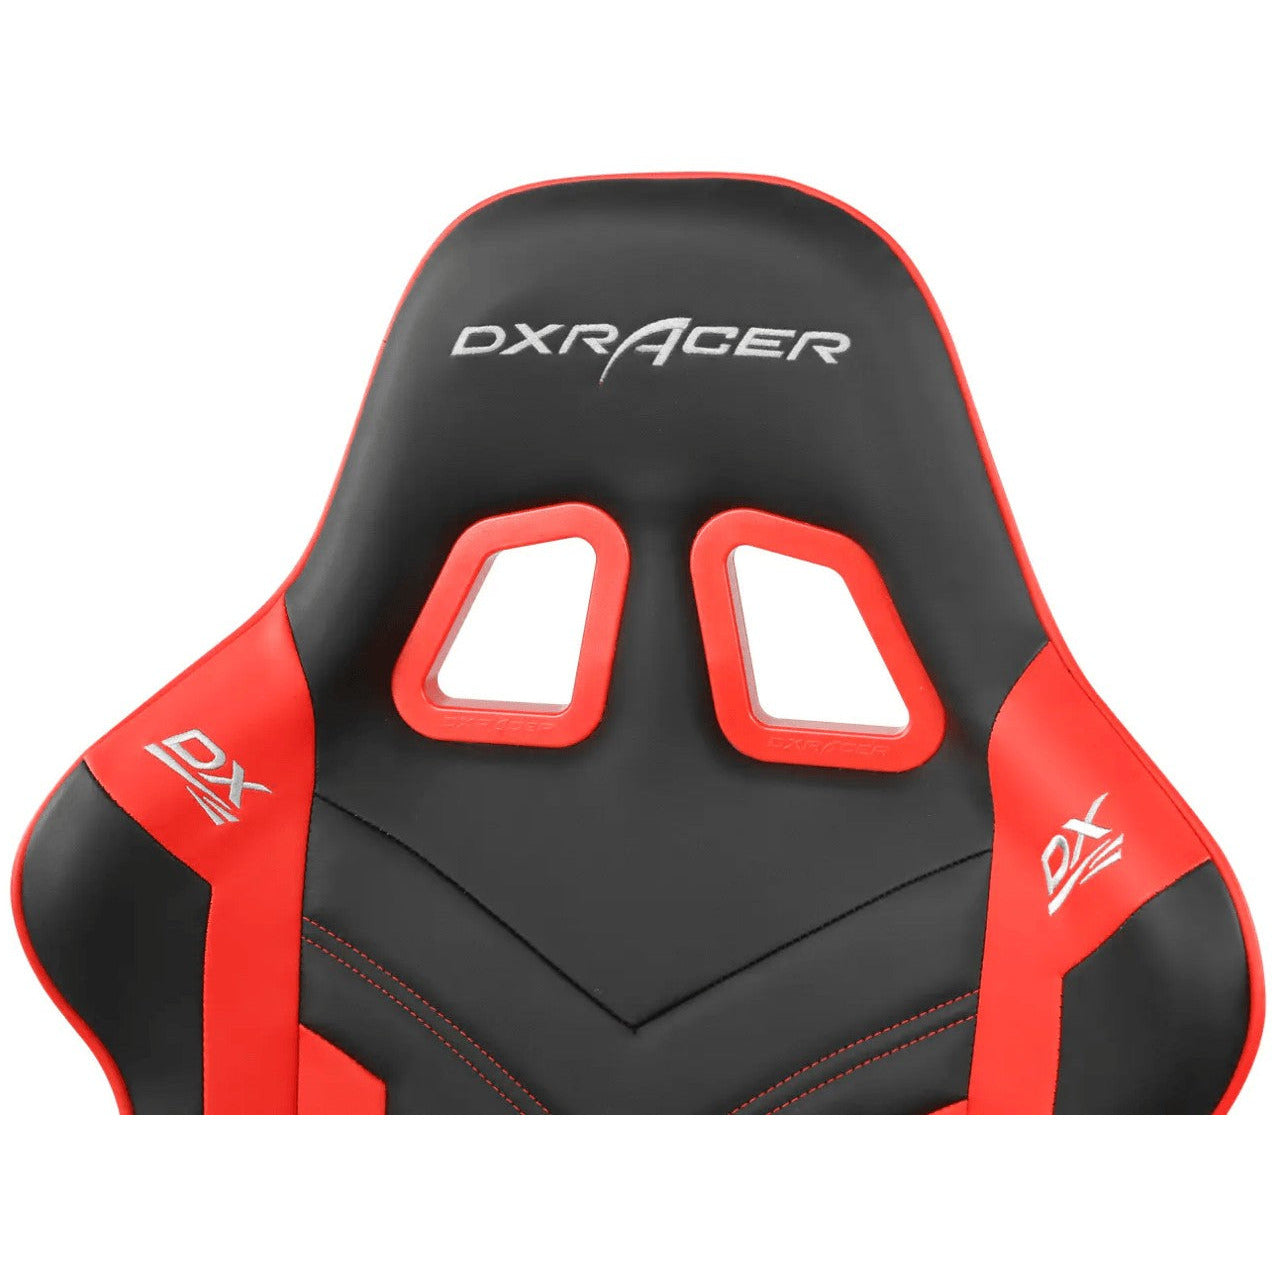 DXRacer Prince D6000 Red and Black Gaming Chair